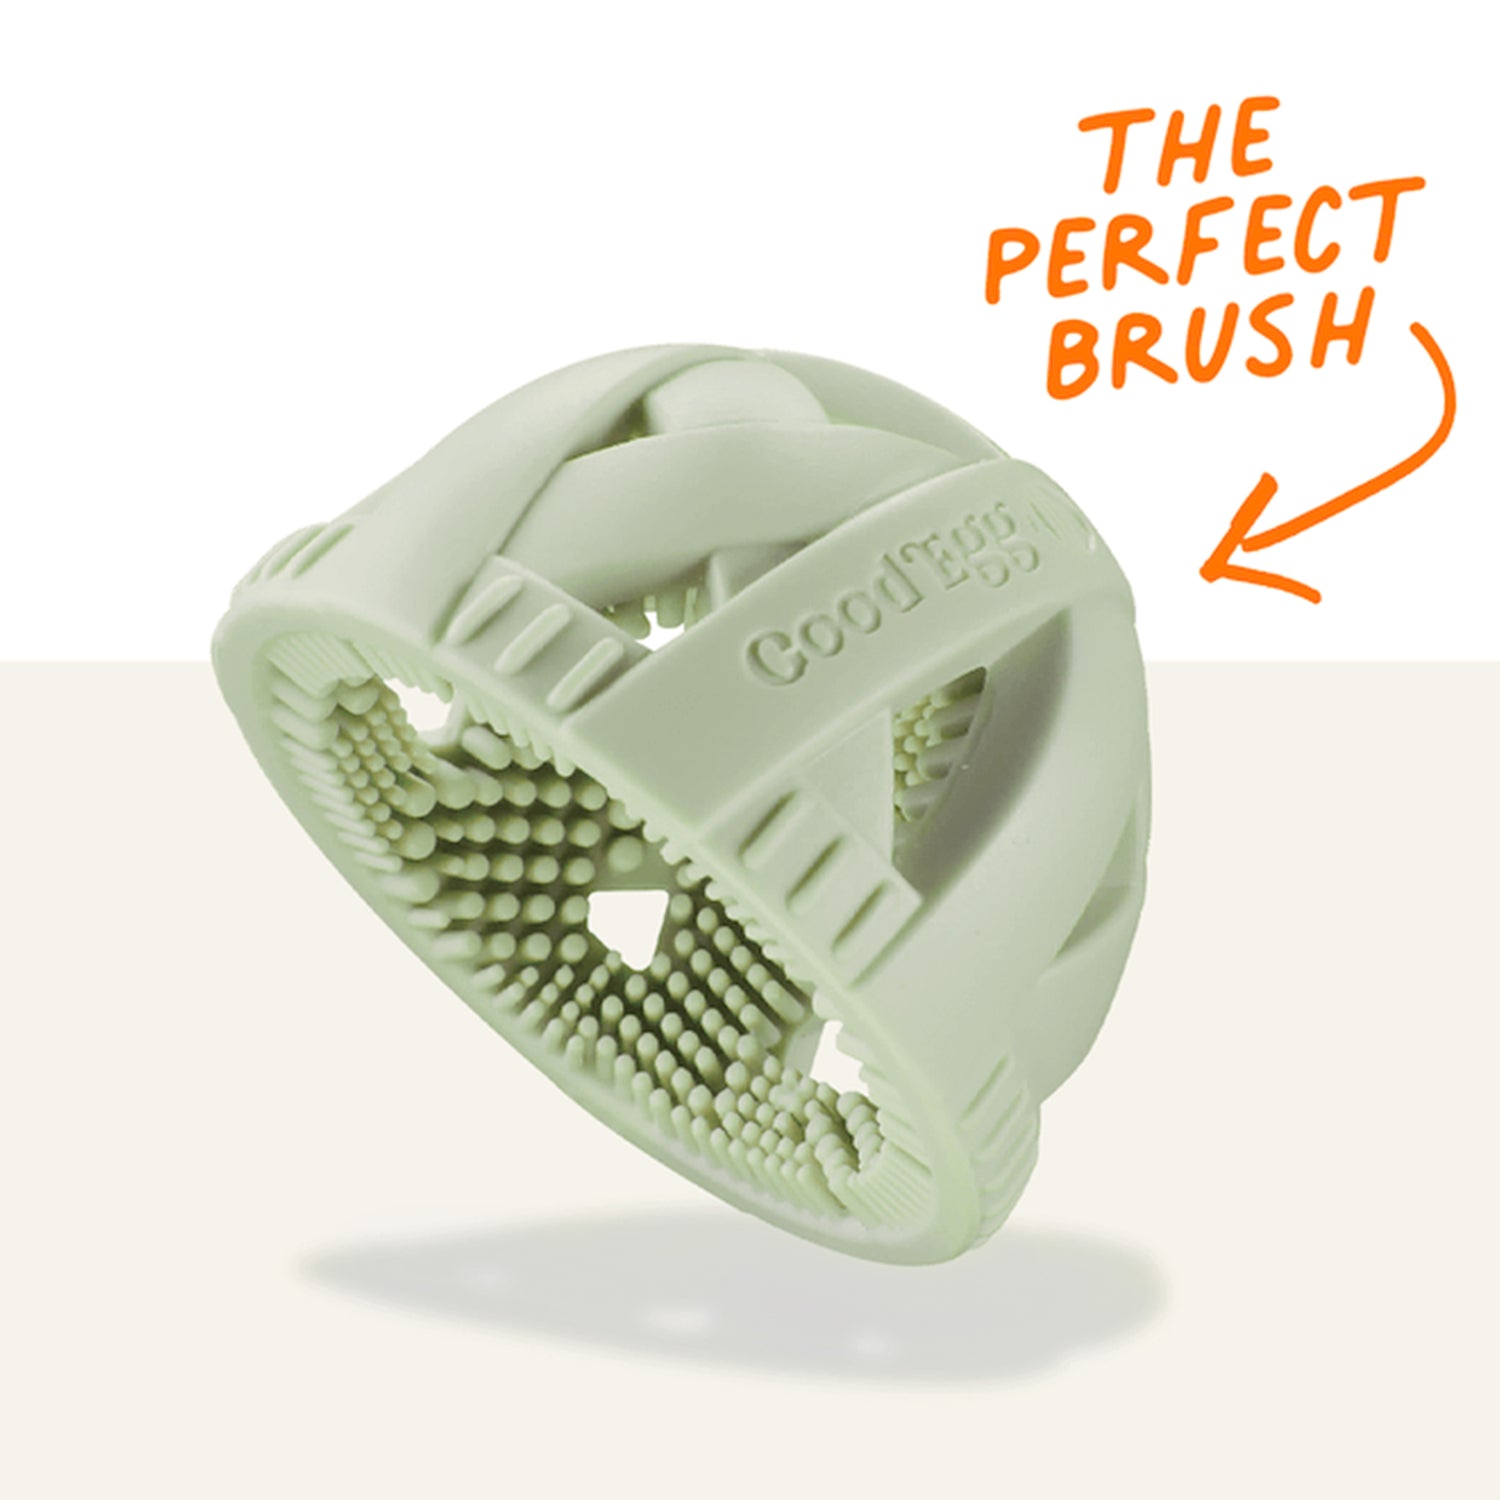 the GoodEgg Brush with an arrow pointing to it that says "the perfect brush"